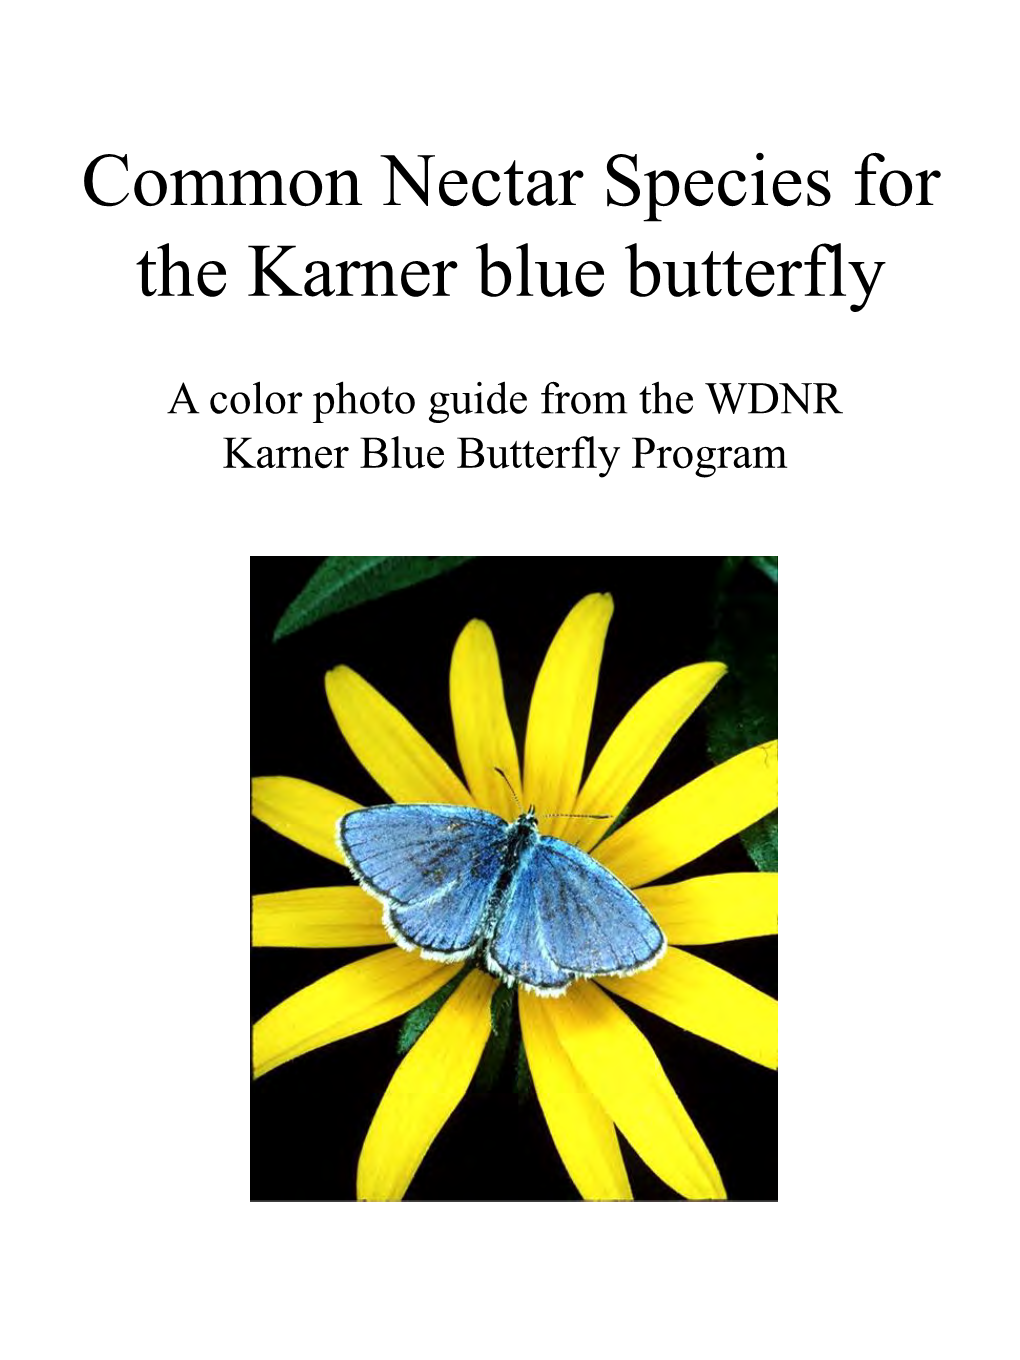 Common Nectar Species for the Karner Blue Butterfly